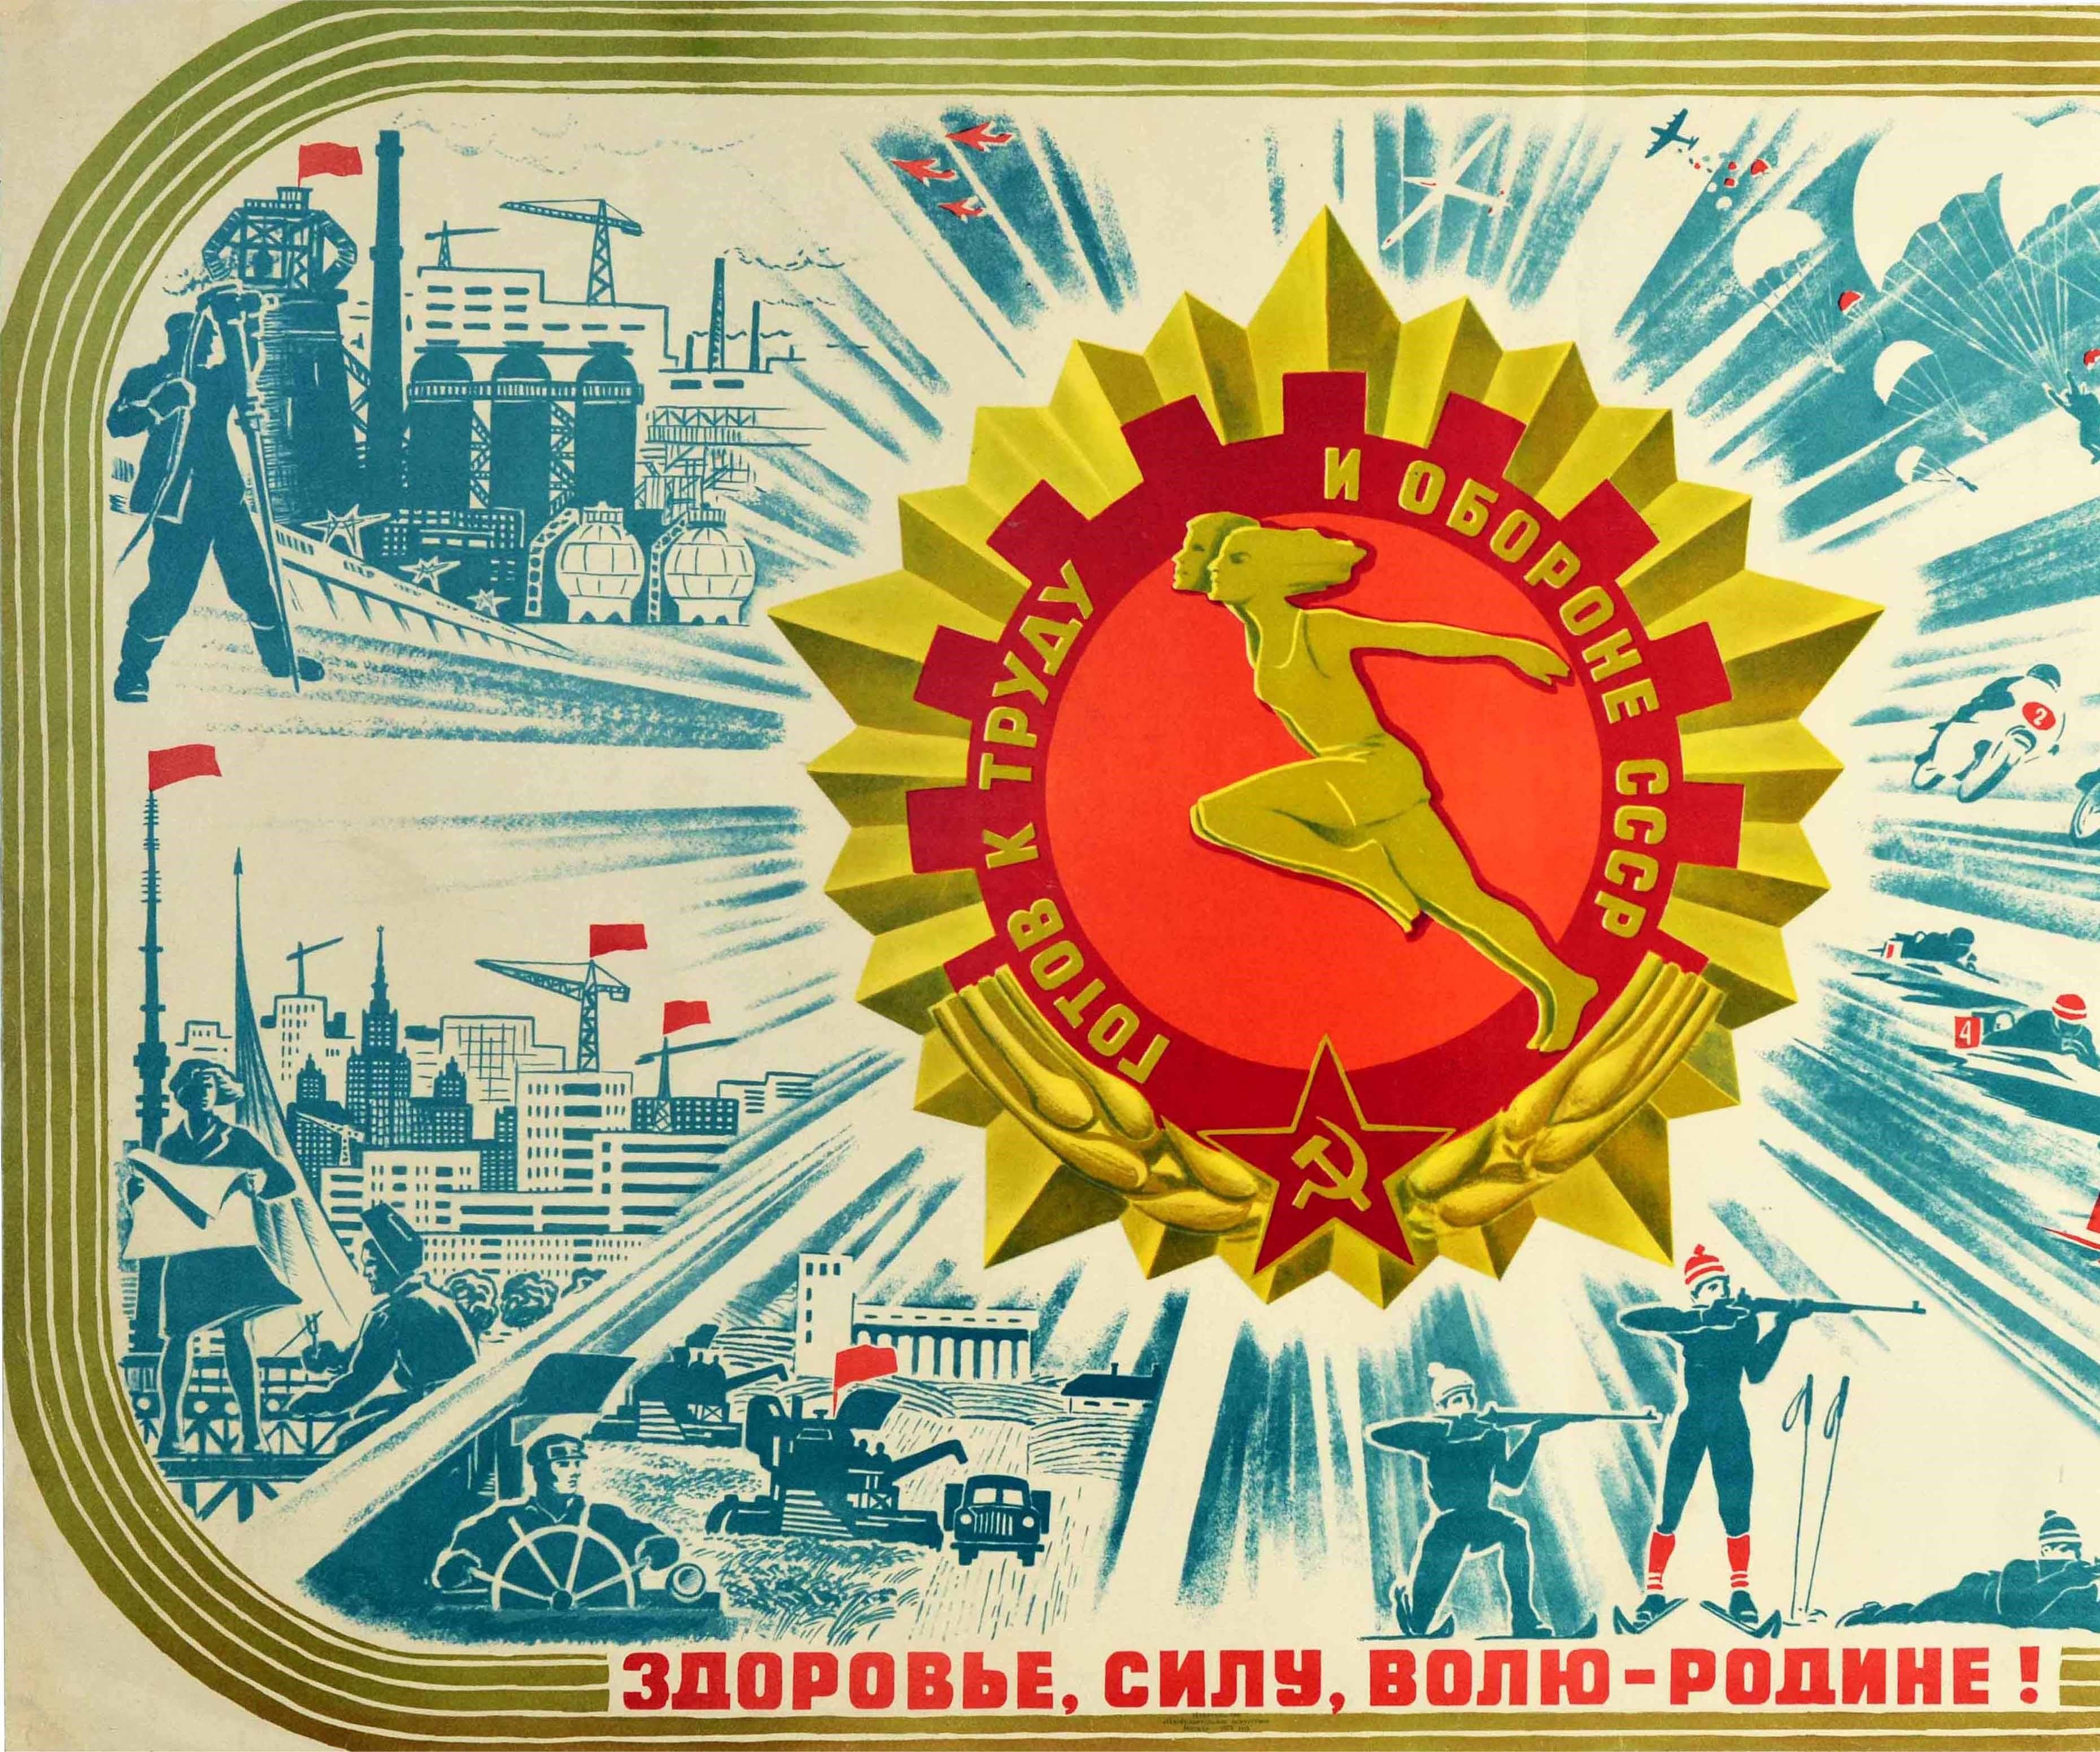 Original vintage Soviet sports propaganda poster promoting the GTO Gotov k Trudu i Oborone / Ready for Work and Defense system of fitness ranking in the USSR - Health, Strength And Will To Our Motherland! Strong design featuring a red and gold medal